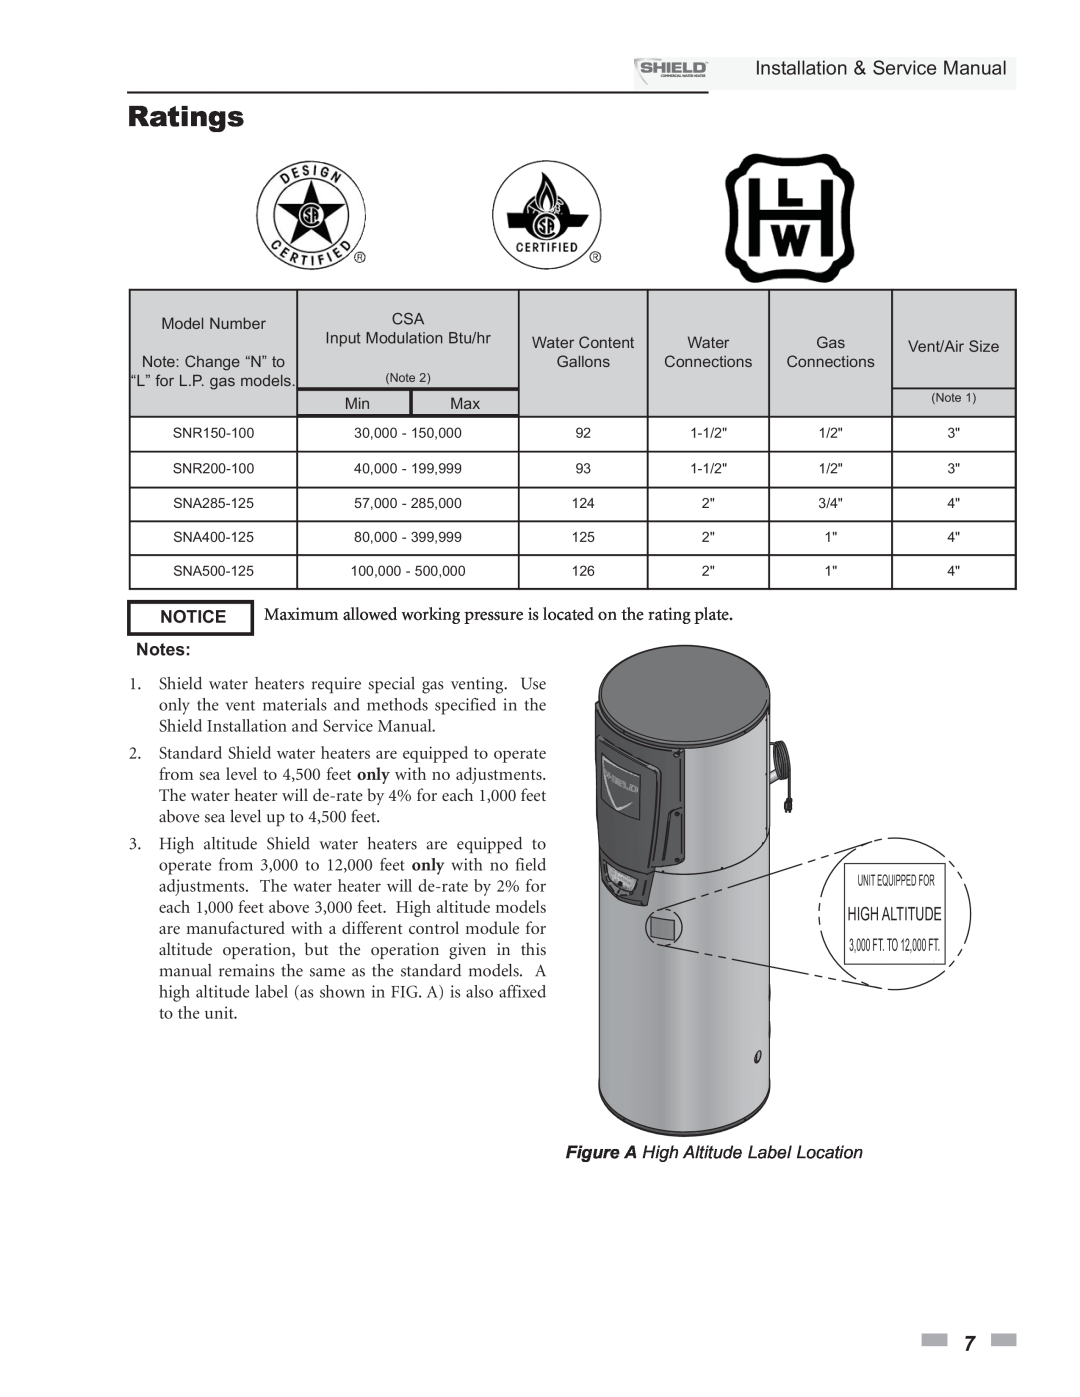 Lochinvar SNA285-125, SNA500-125 Ratings, Installation & Service Manual, Notes, Figure A High Altitude Label Location 